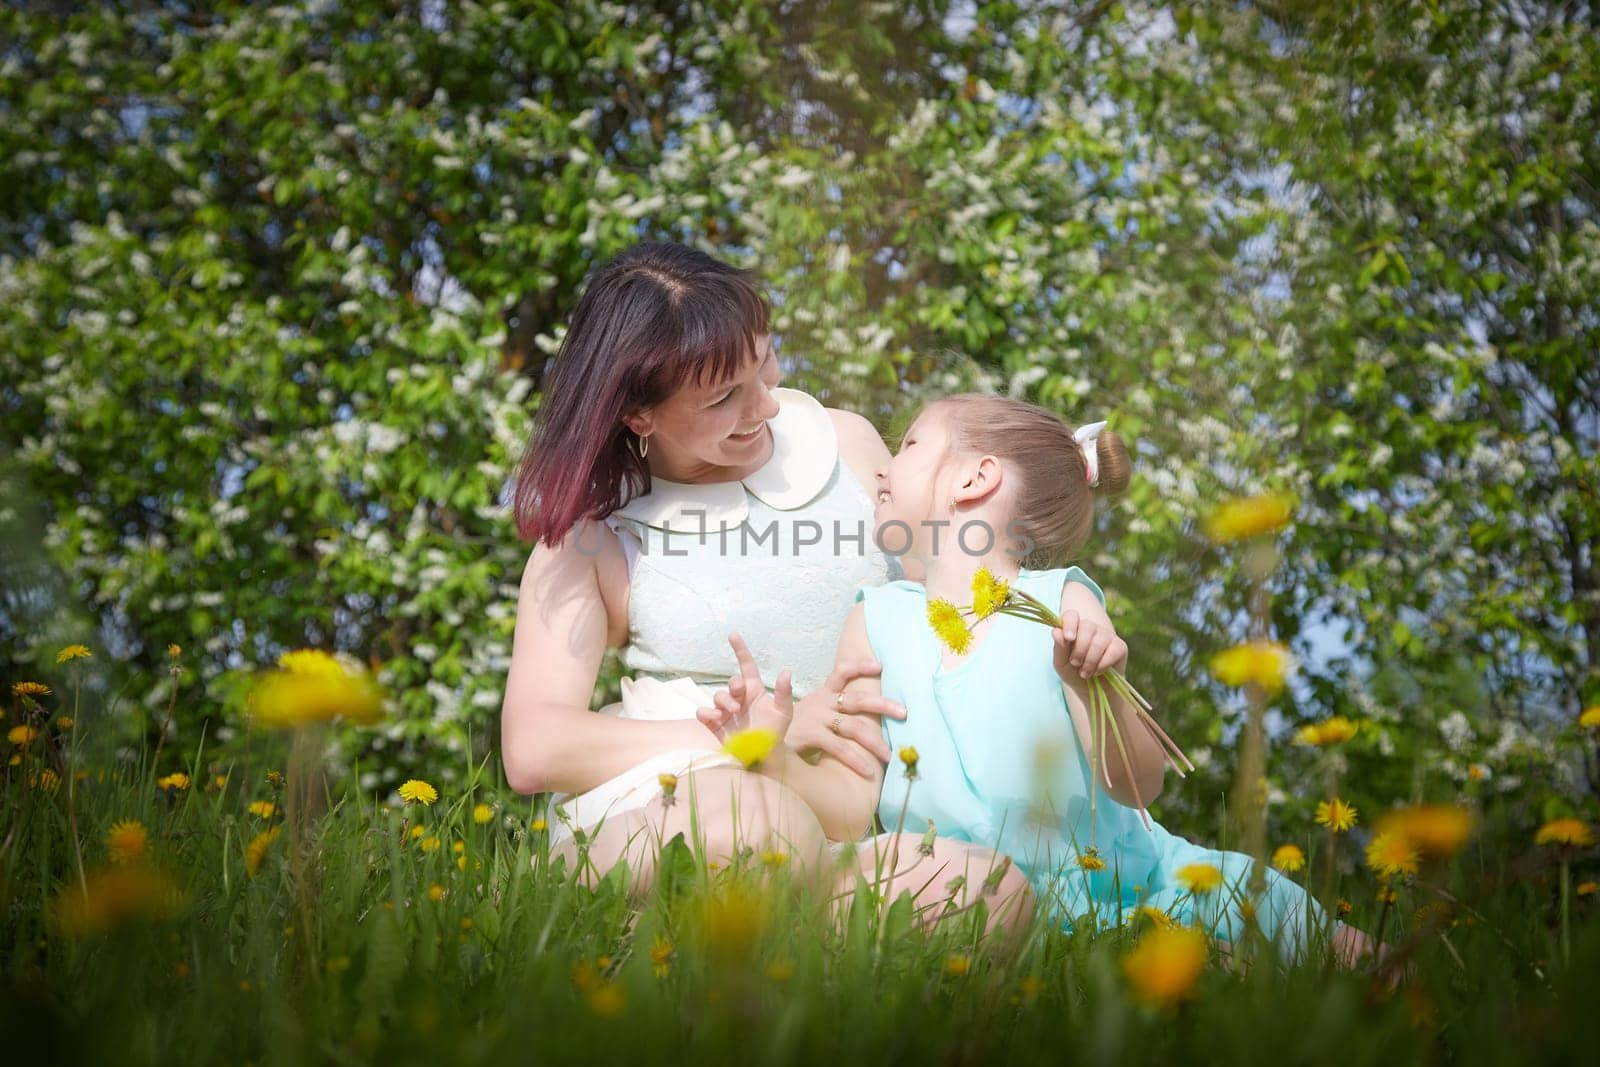 Happy mother and daughter enjoying rest, playing and fun on nature on a green lawn with dandelions and blooming apple tree on the background. Woman and girl resting outdoors in summer and spring day by keleny